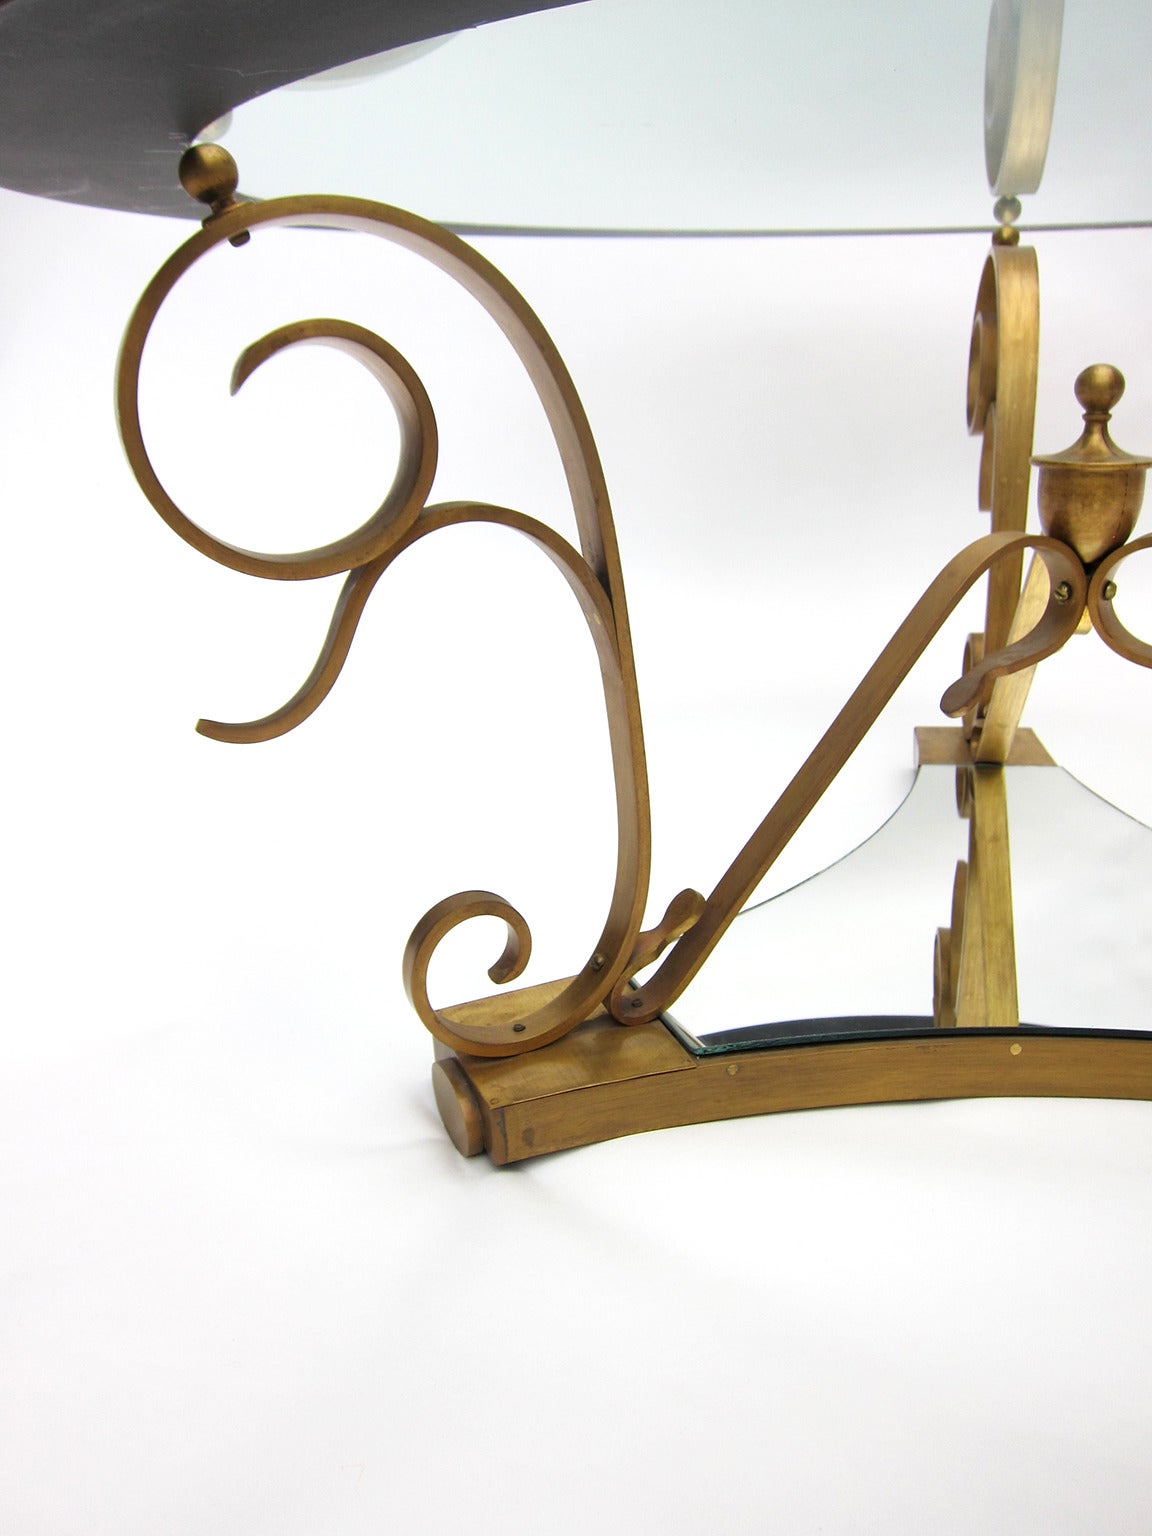 Forged Midcentury Brass Doré Center Table by Arturo Pani For Sale